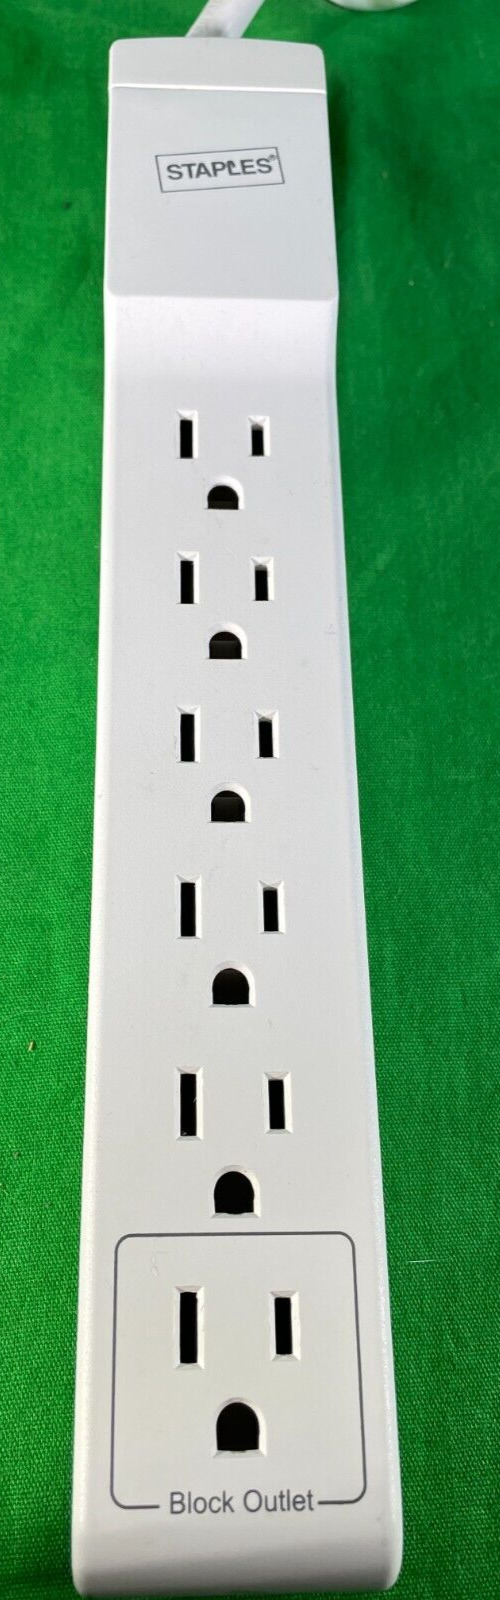 6-Outlet Surge Protector, 2.5' Cord Staples 16943 Power strip